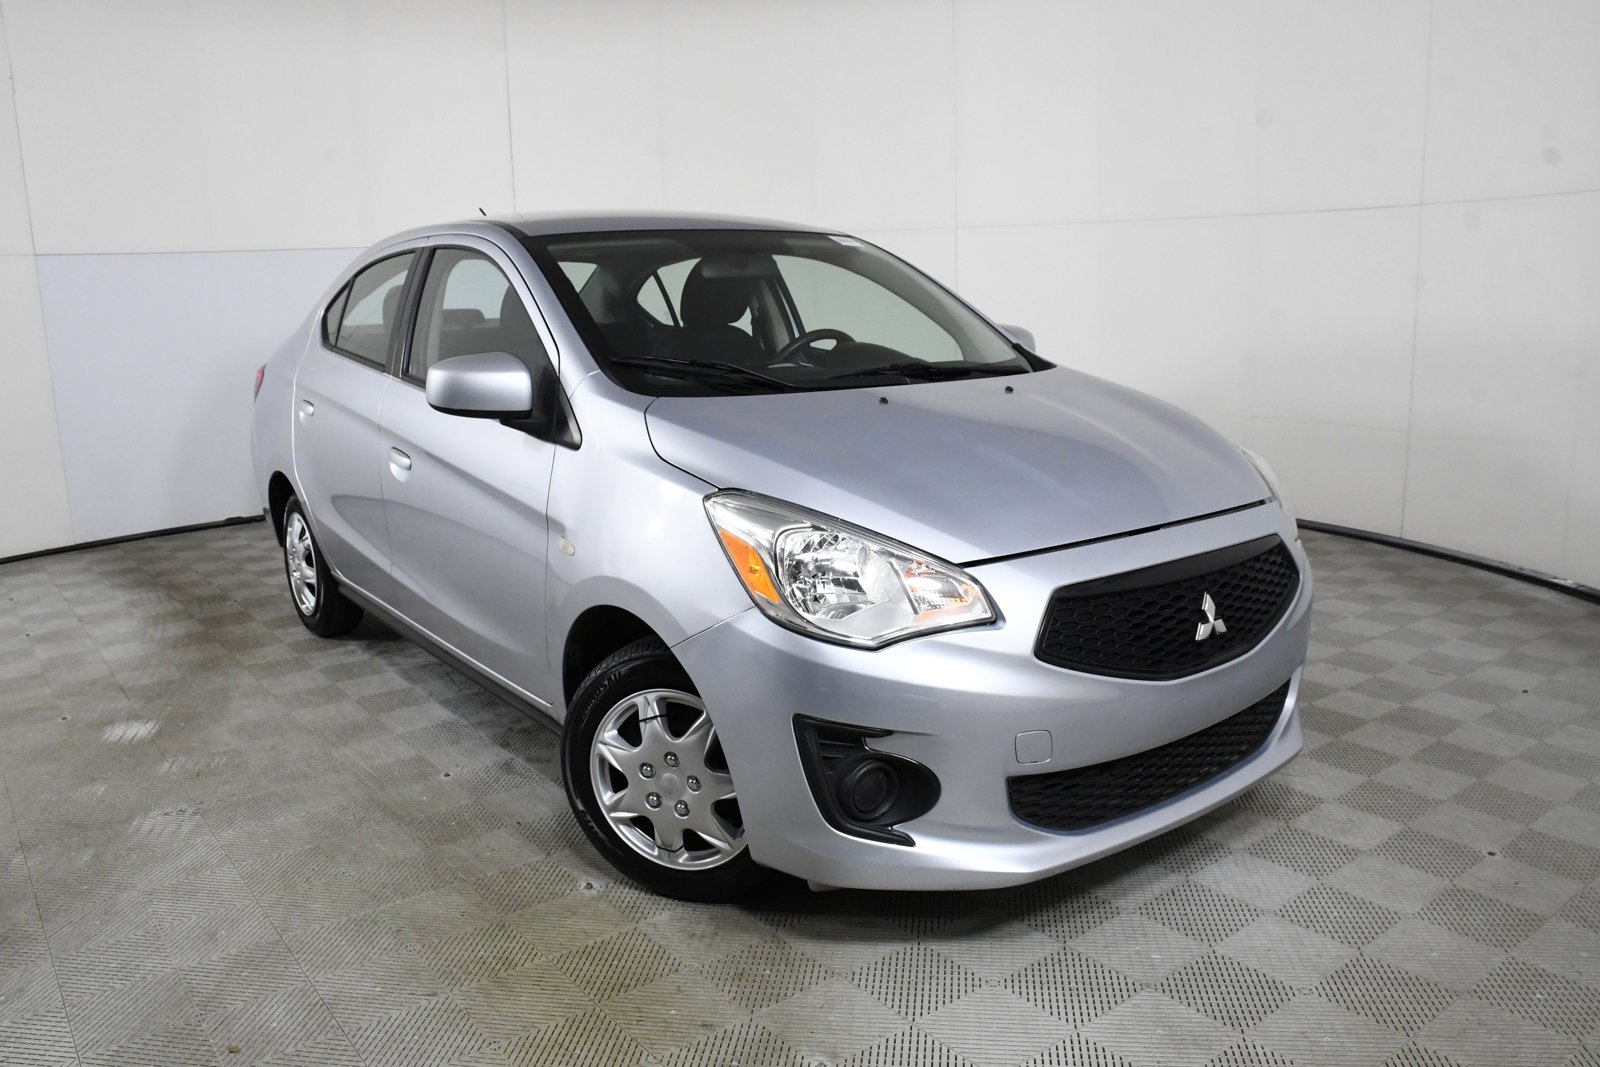 Pre-Owned 2020 Mitsubishi Mirage G4 ES 4dr Car in Palmetto Bay #HF07137 |  HGreg Nissan Kendall